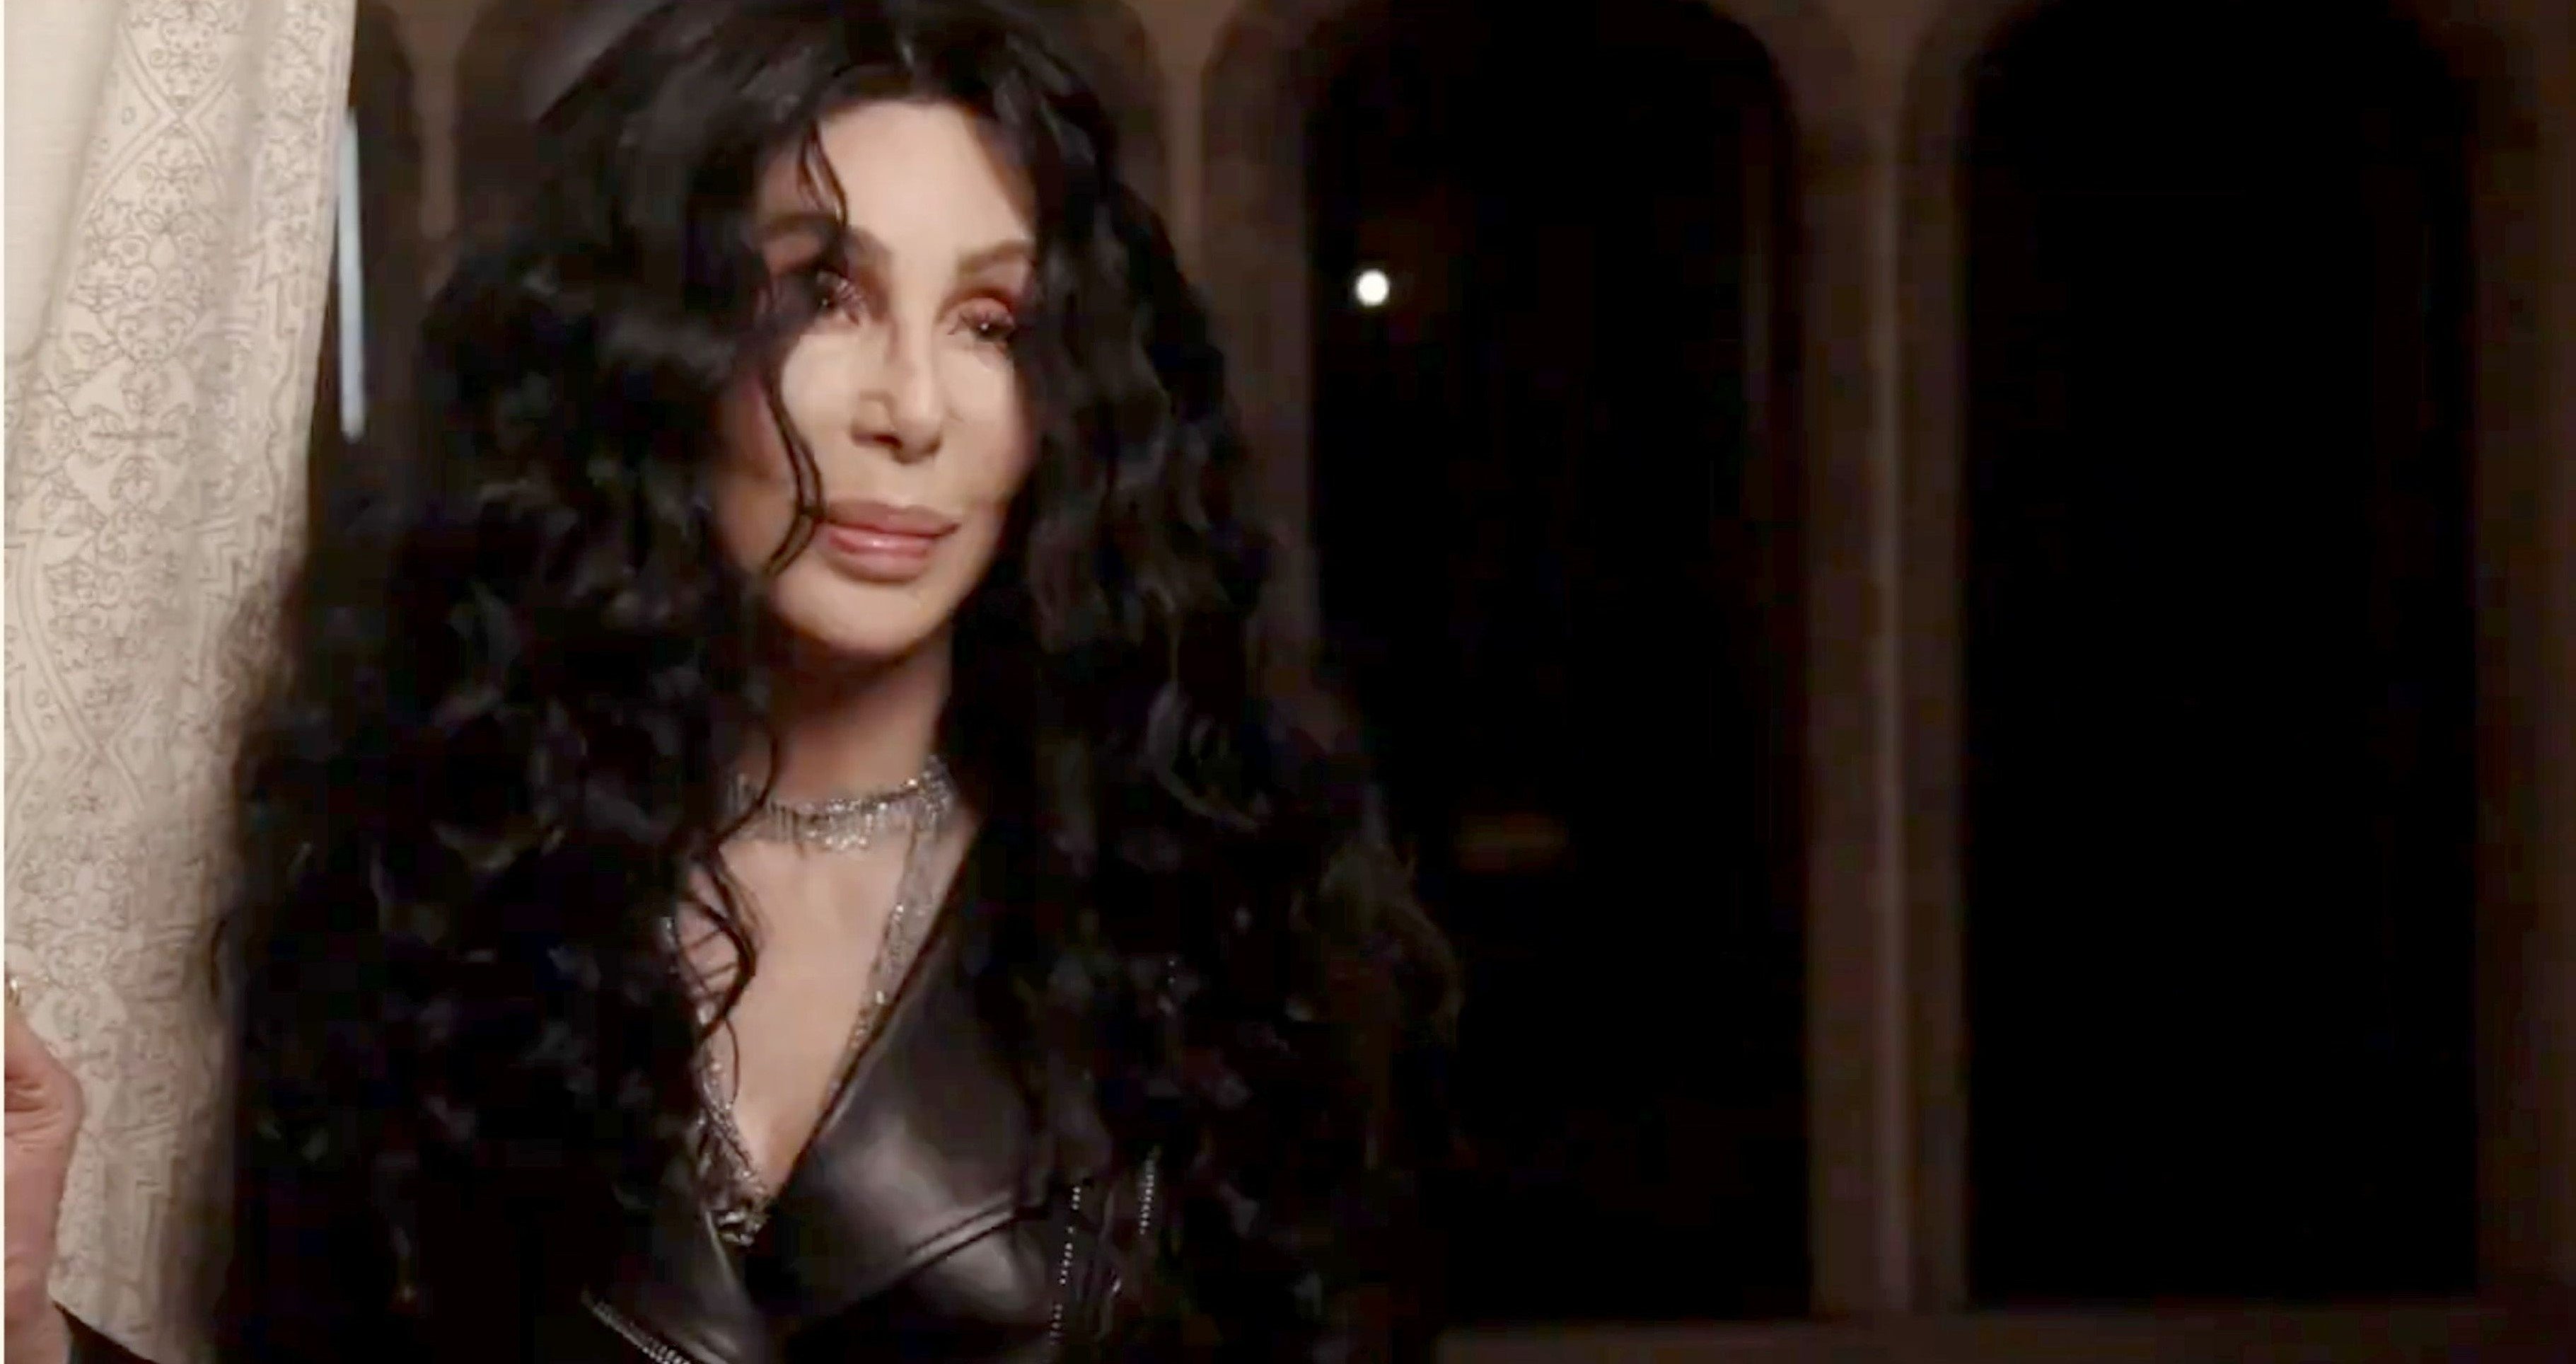 Cher performing during the 'We the People' virtual concert